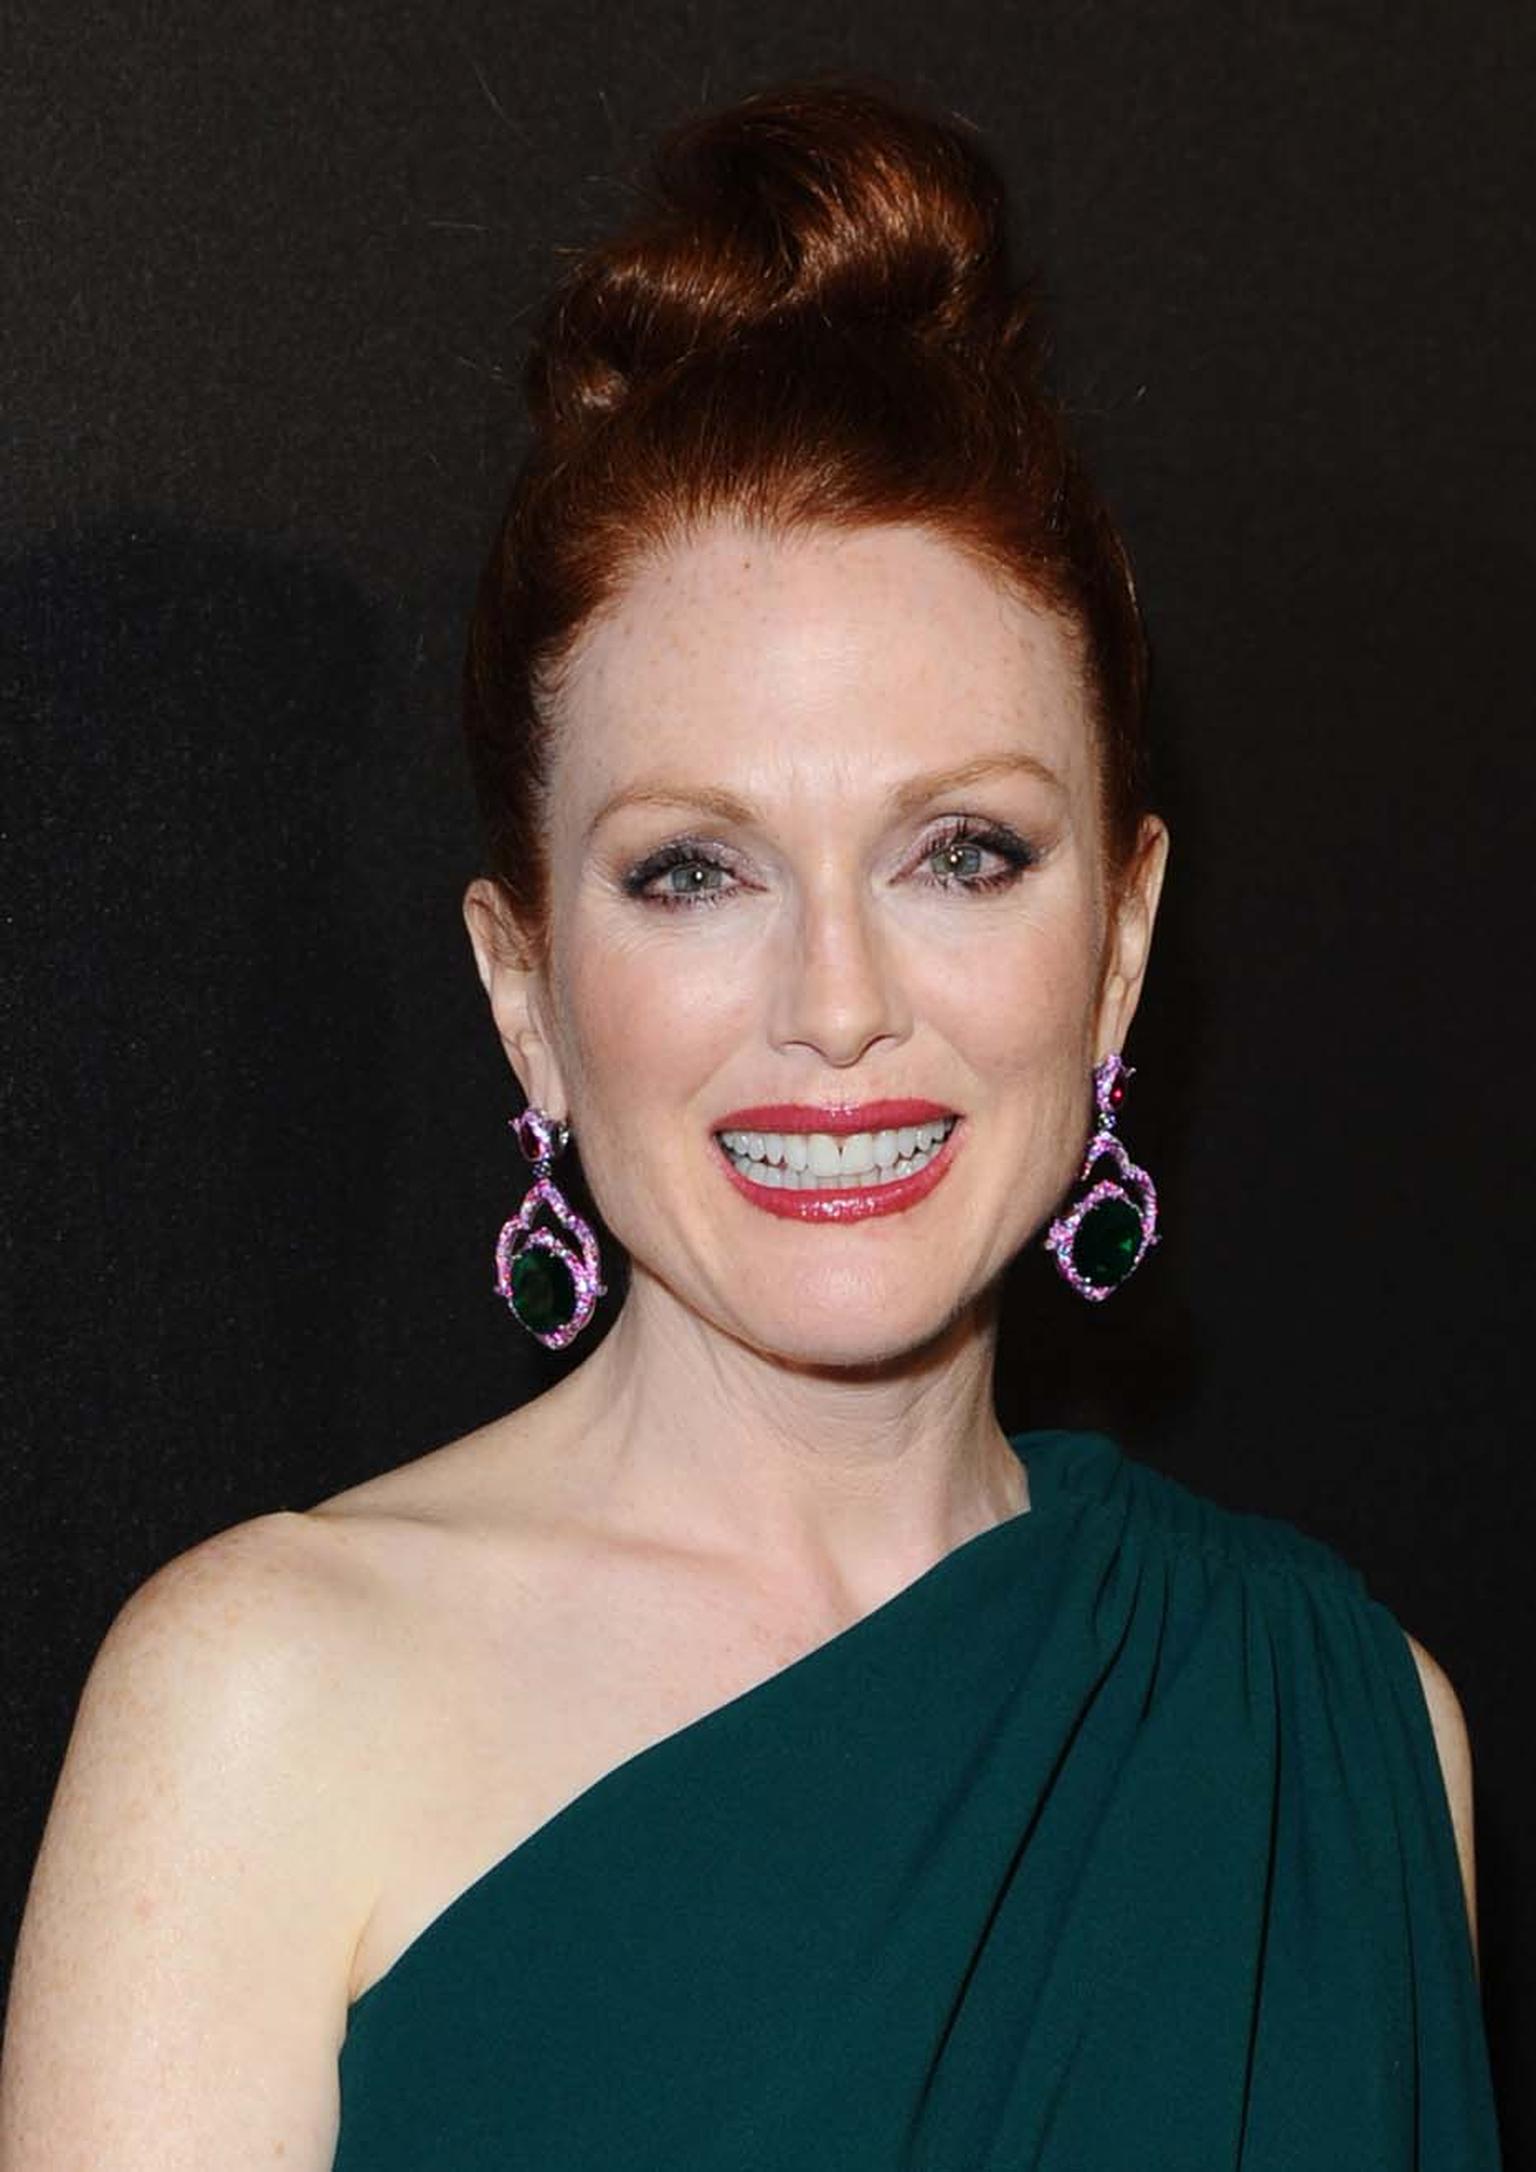 Julianne Moore attended the Hunger Games party wearing a pair of earrings from Chopard's 2014 Red Carpet collection - the first time these colourful jewels, set with 44ct emeralds surrounded by pink sapphires and rubies, made a red carpet appearance.